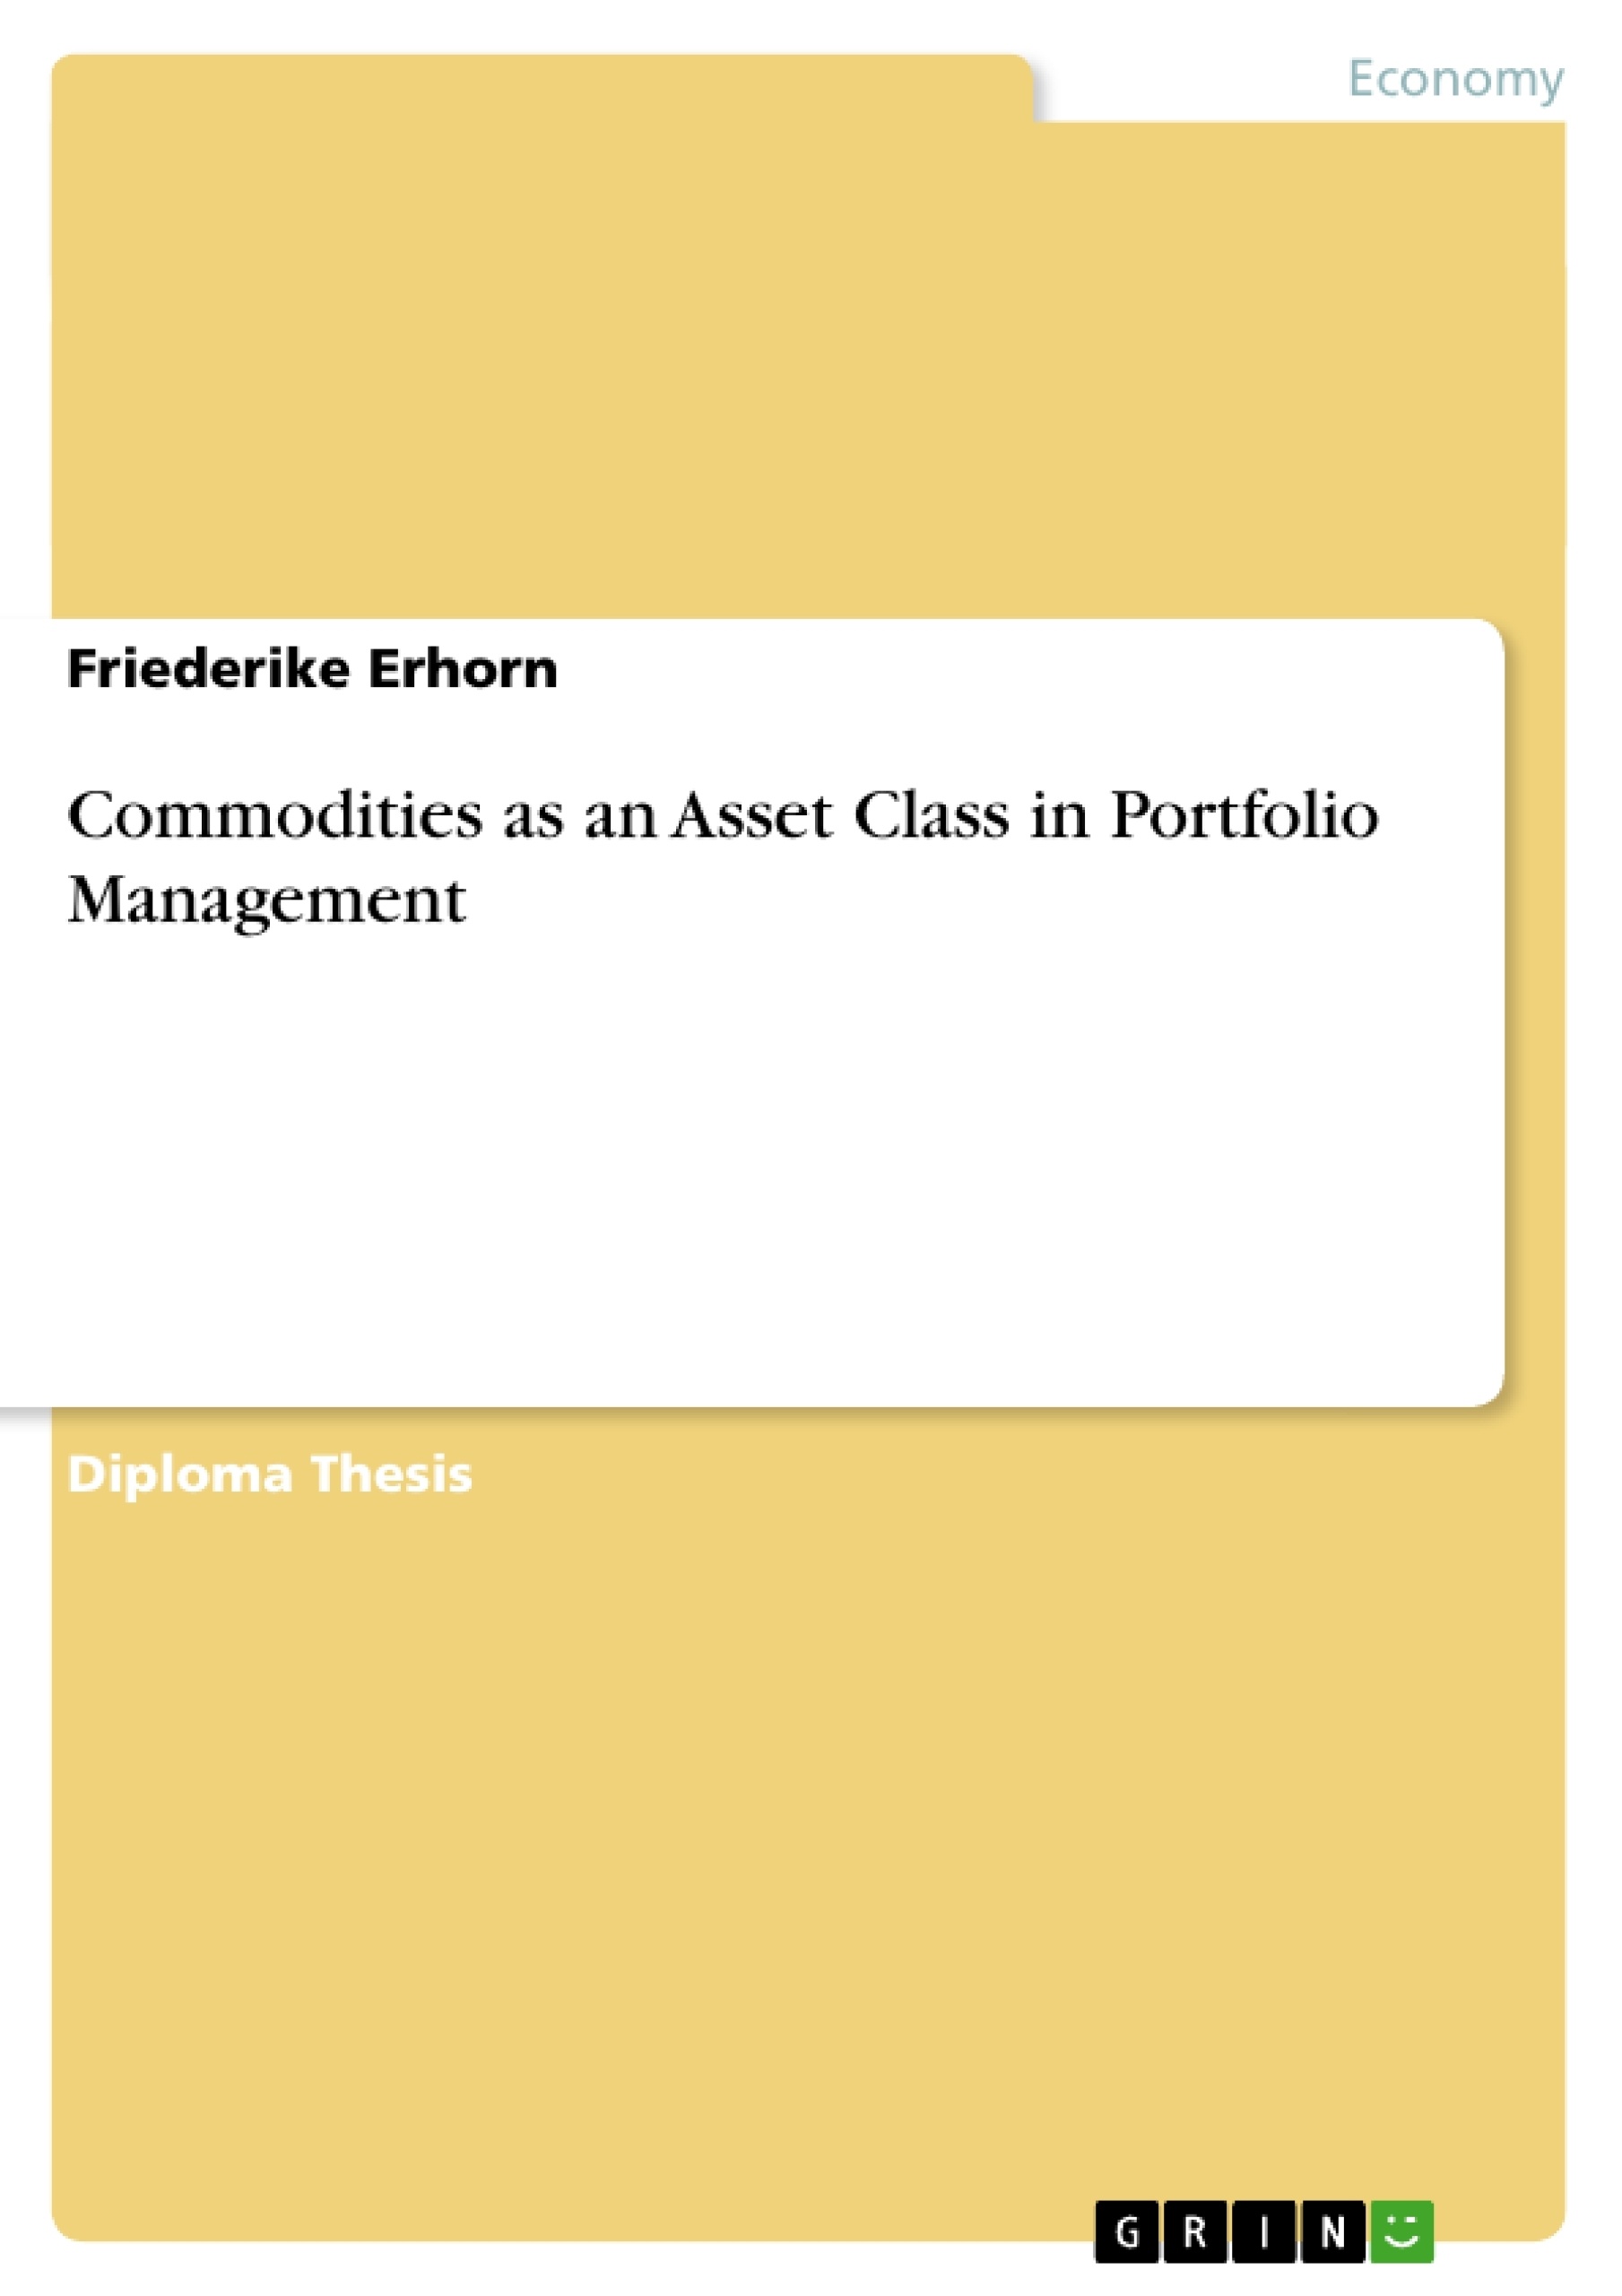 Title: Commodities as an Asset Class in Portfolio Management